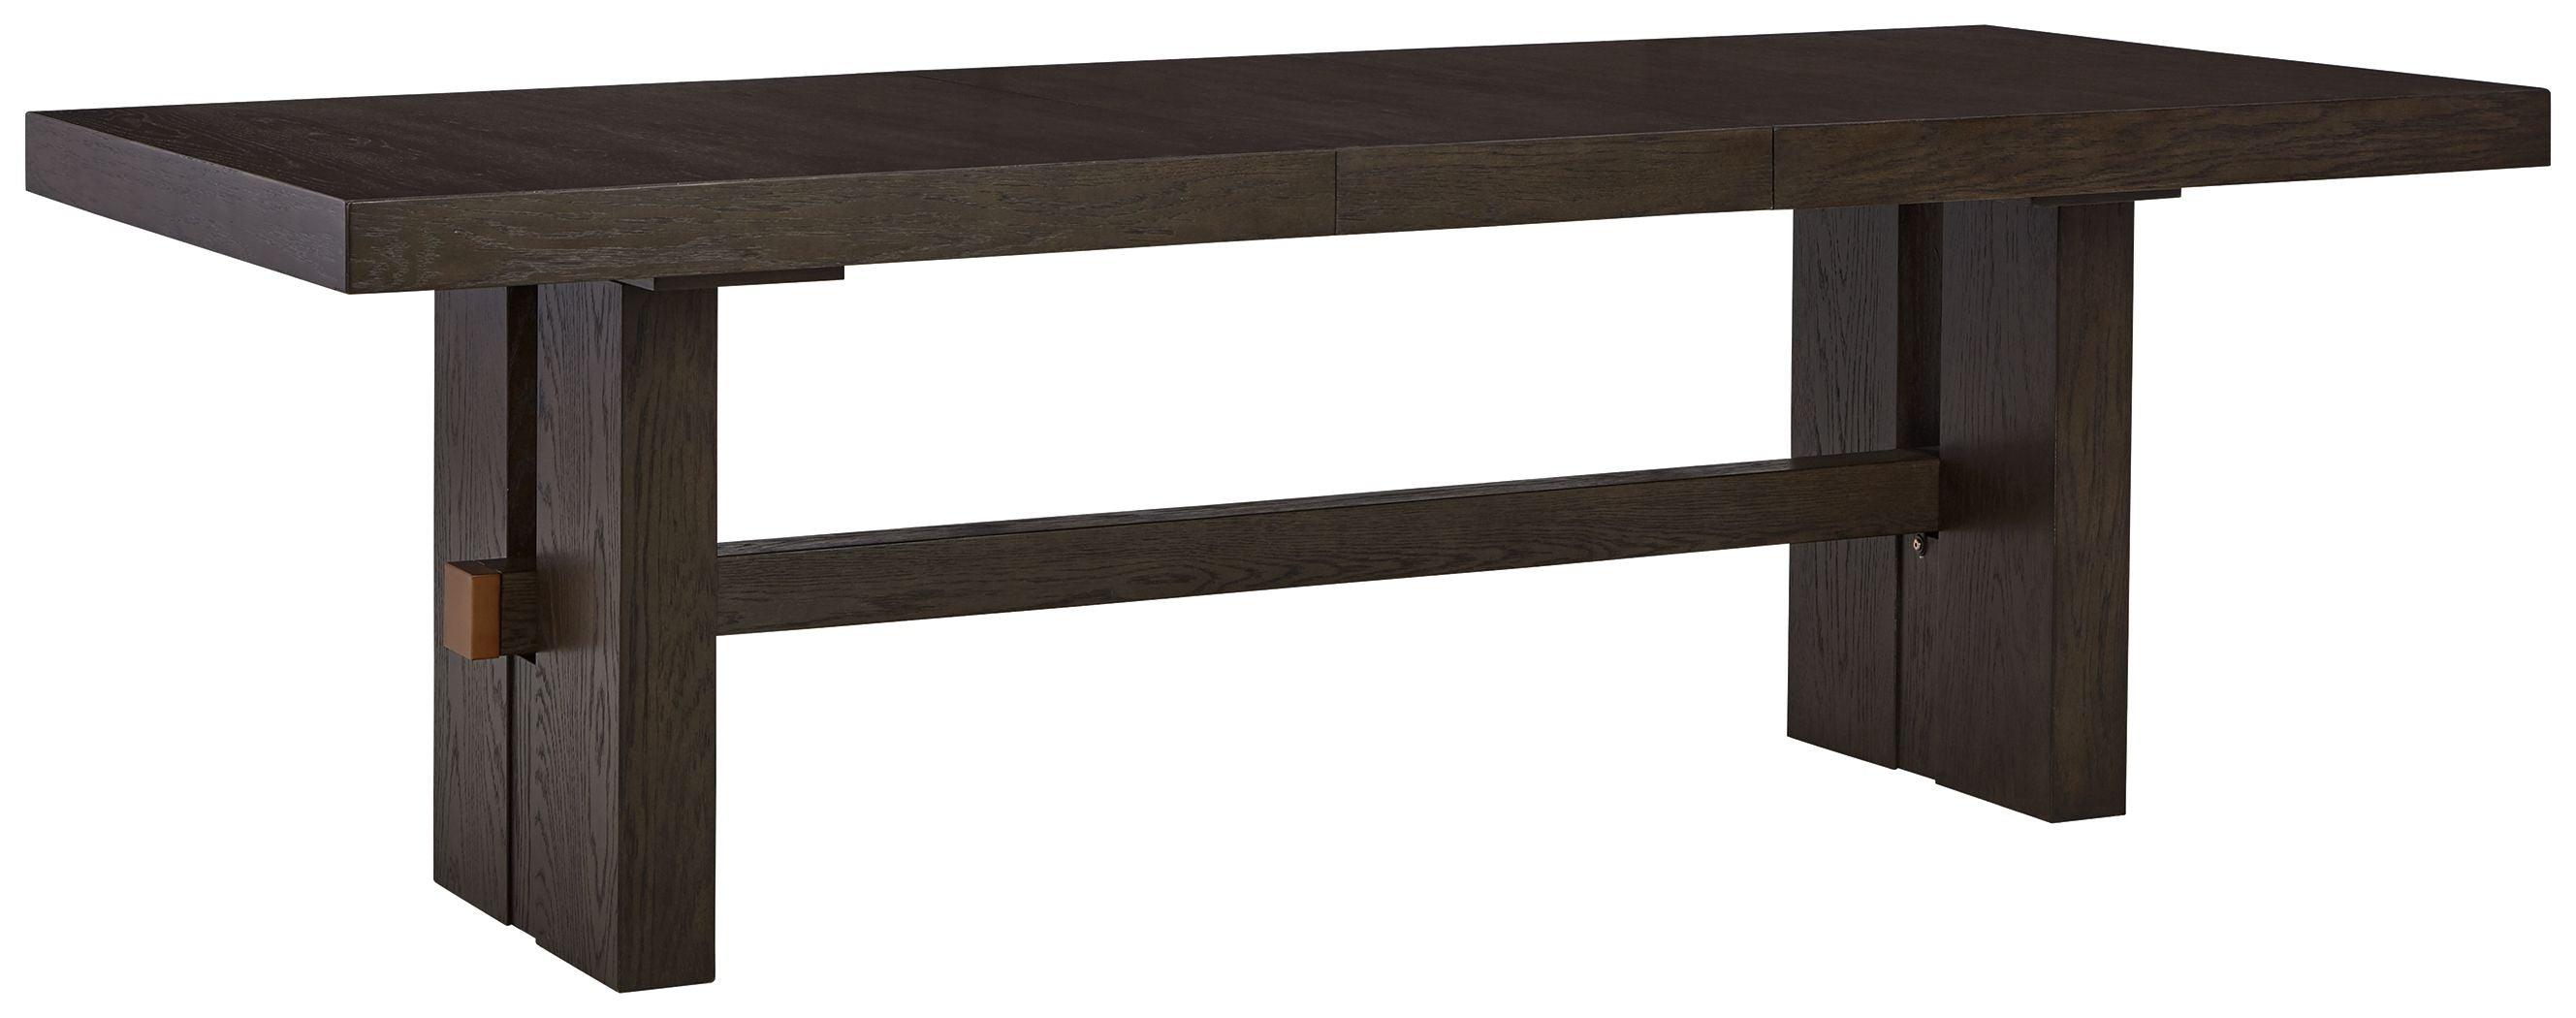 Signature Design by Ashley® - Burkhaus - Dark Brown - Rectangular Dining Room Extension Table - 5th Avenue Furniture